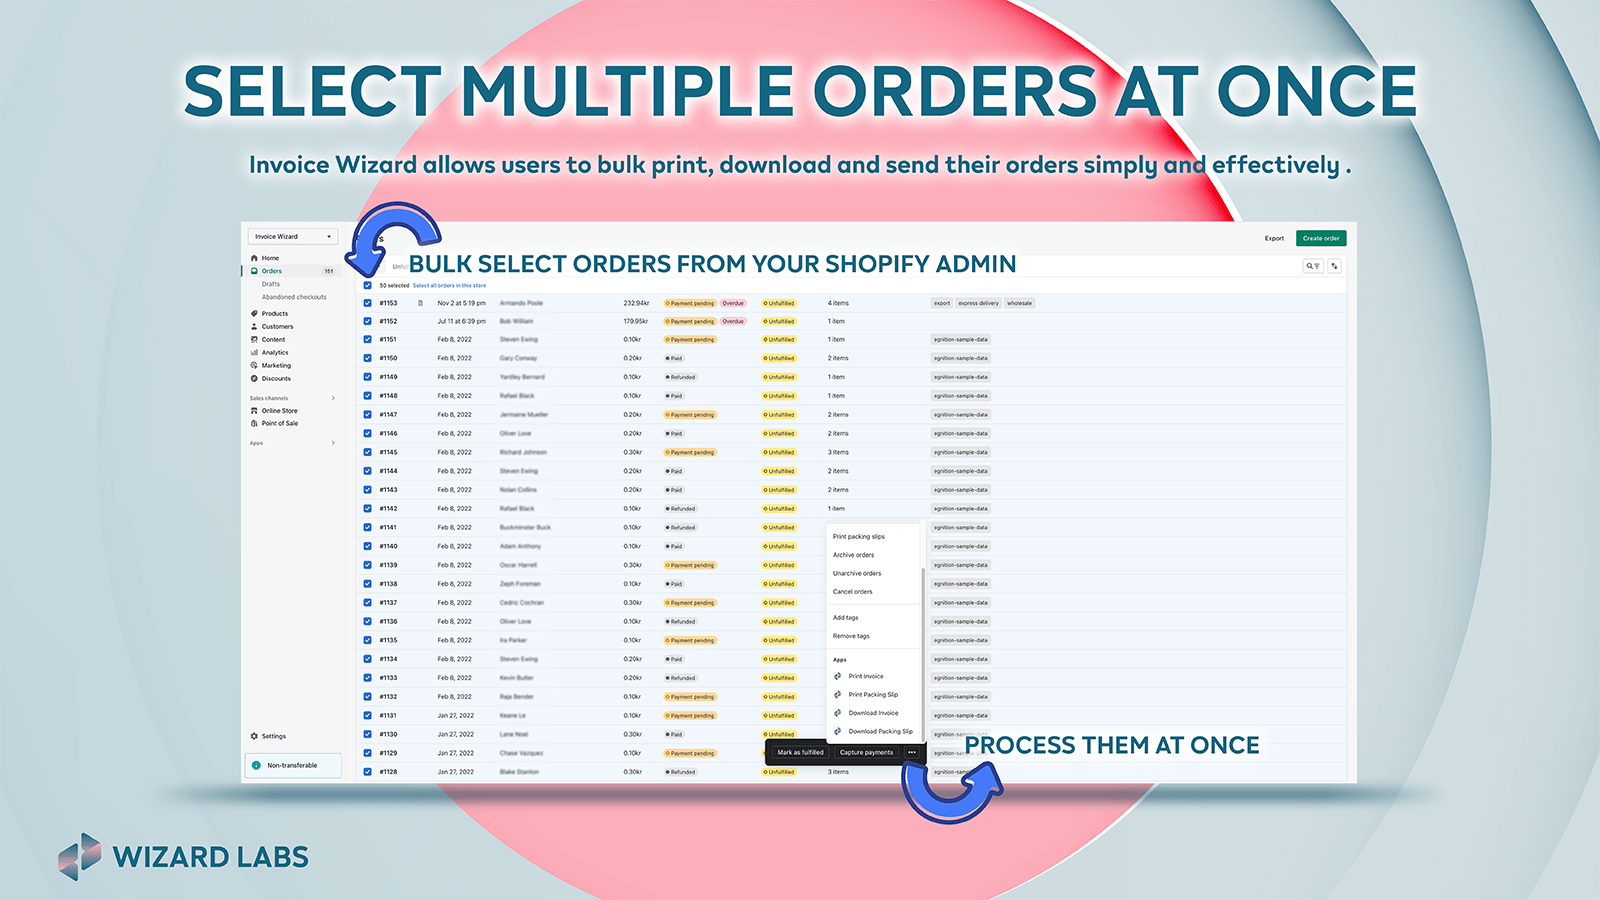 Select multiple orders at once.